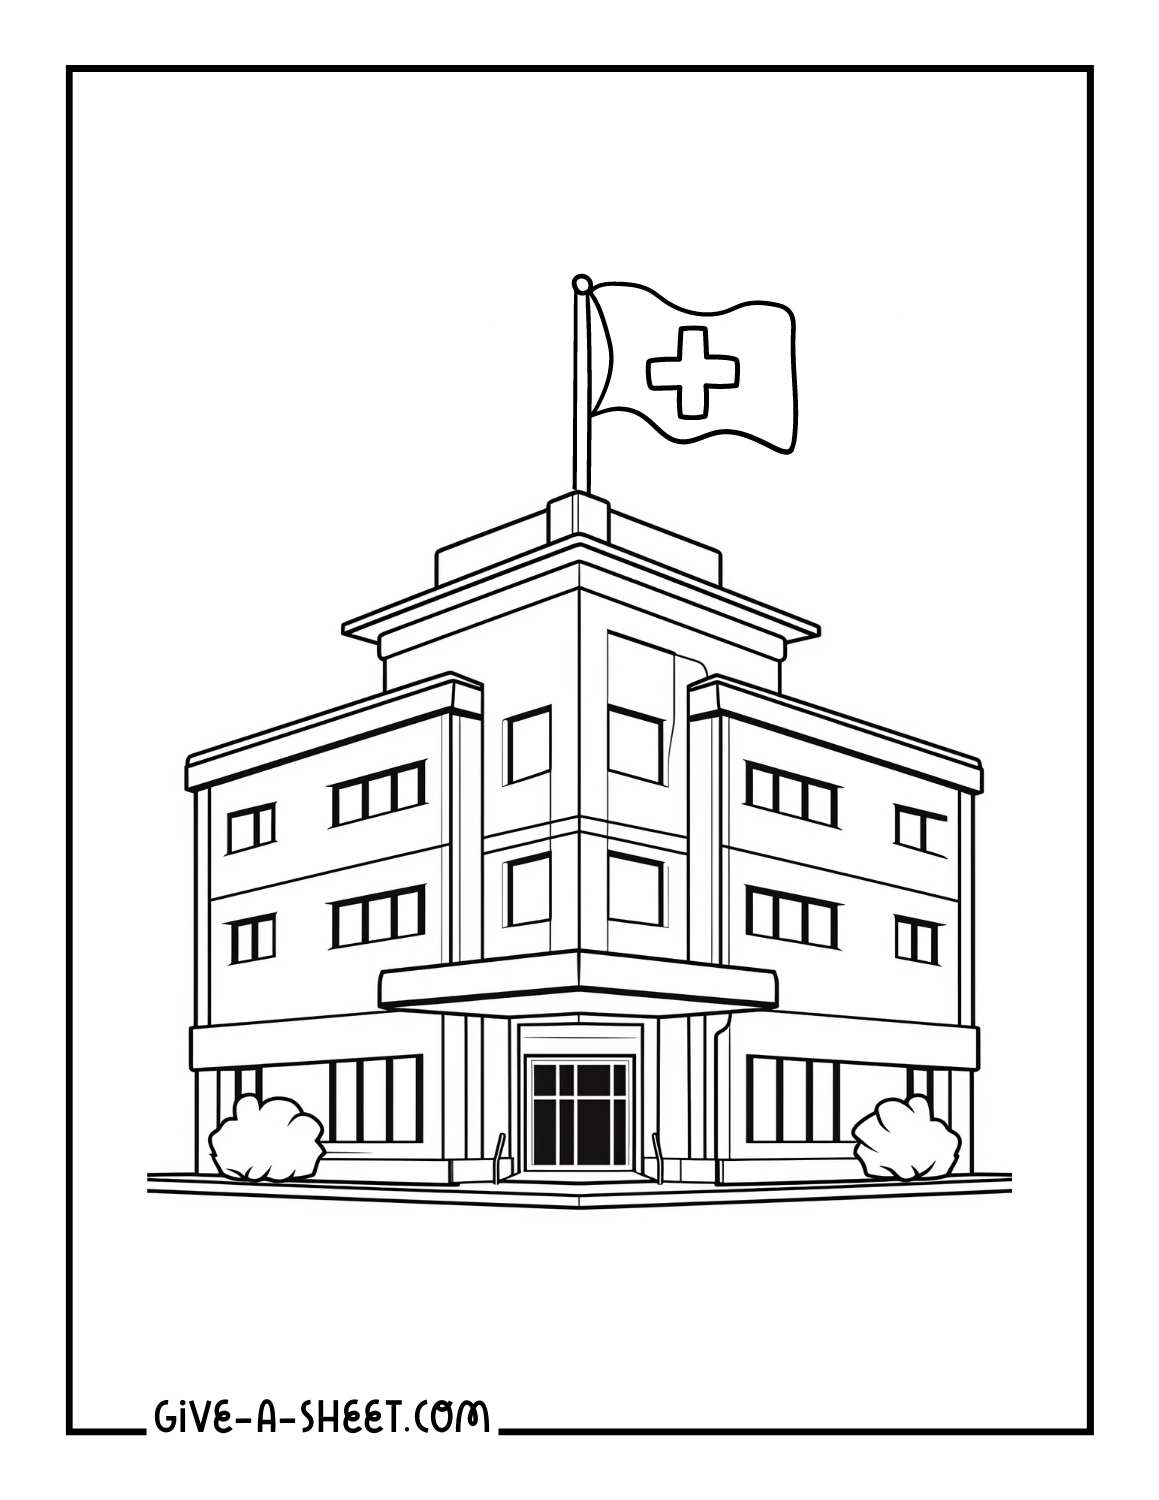 Hospital with a red cross flag.